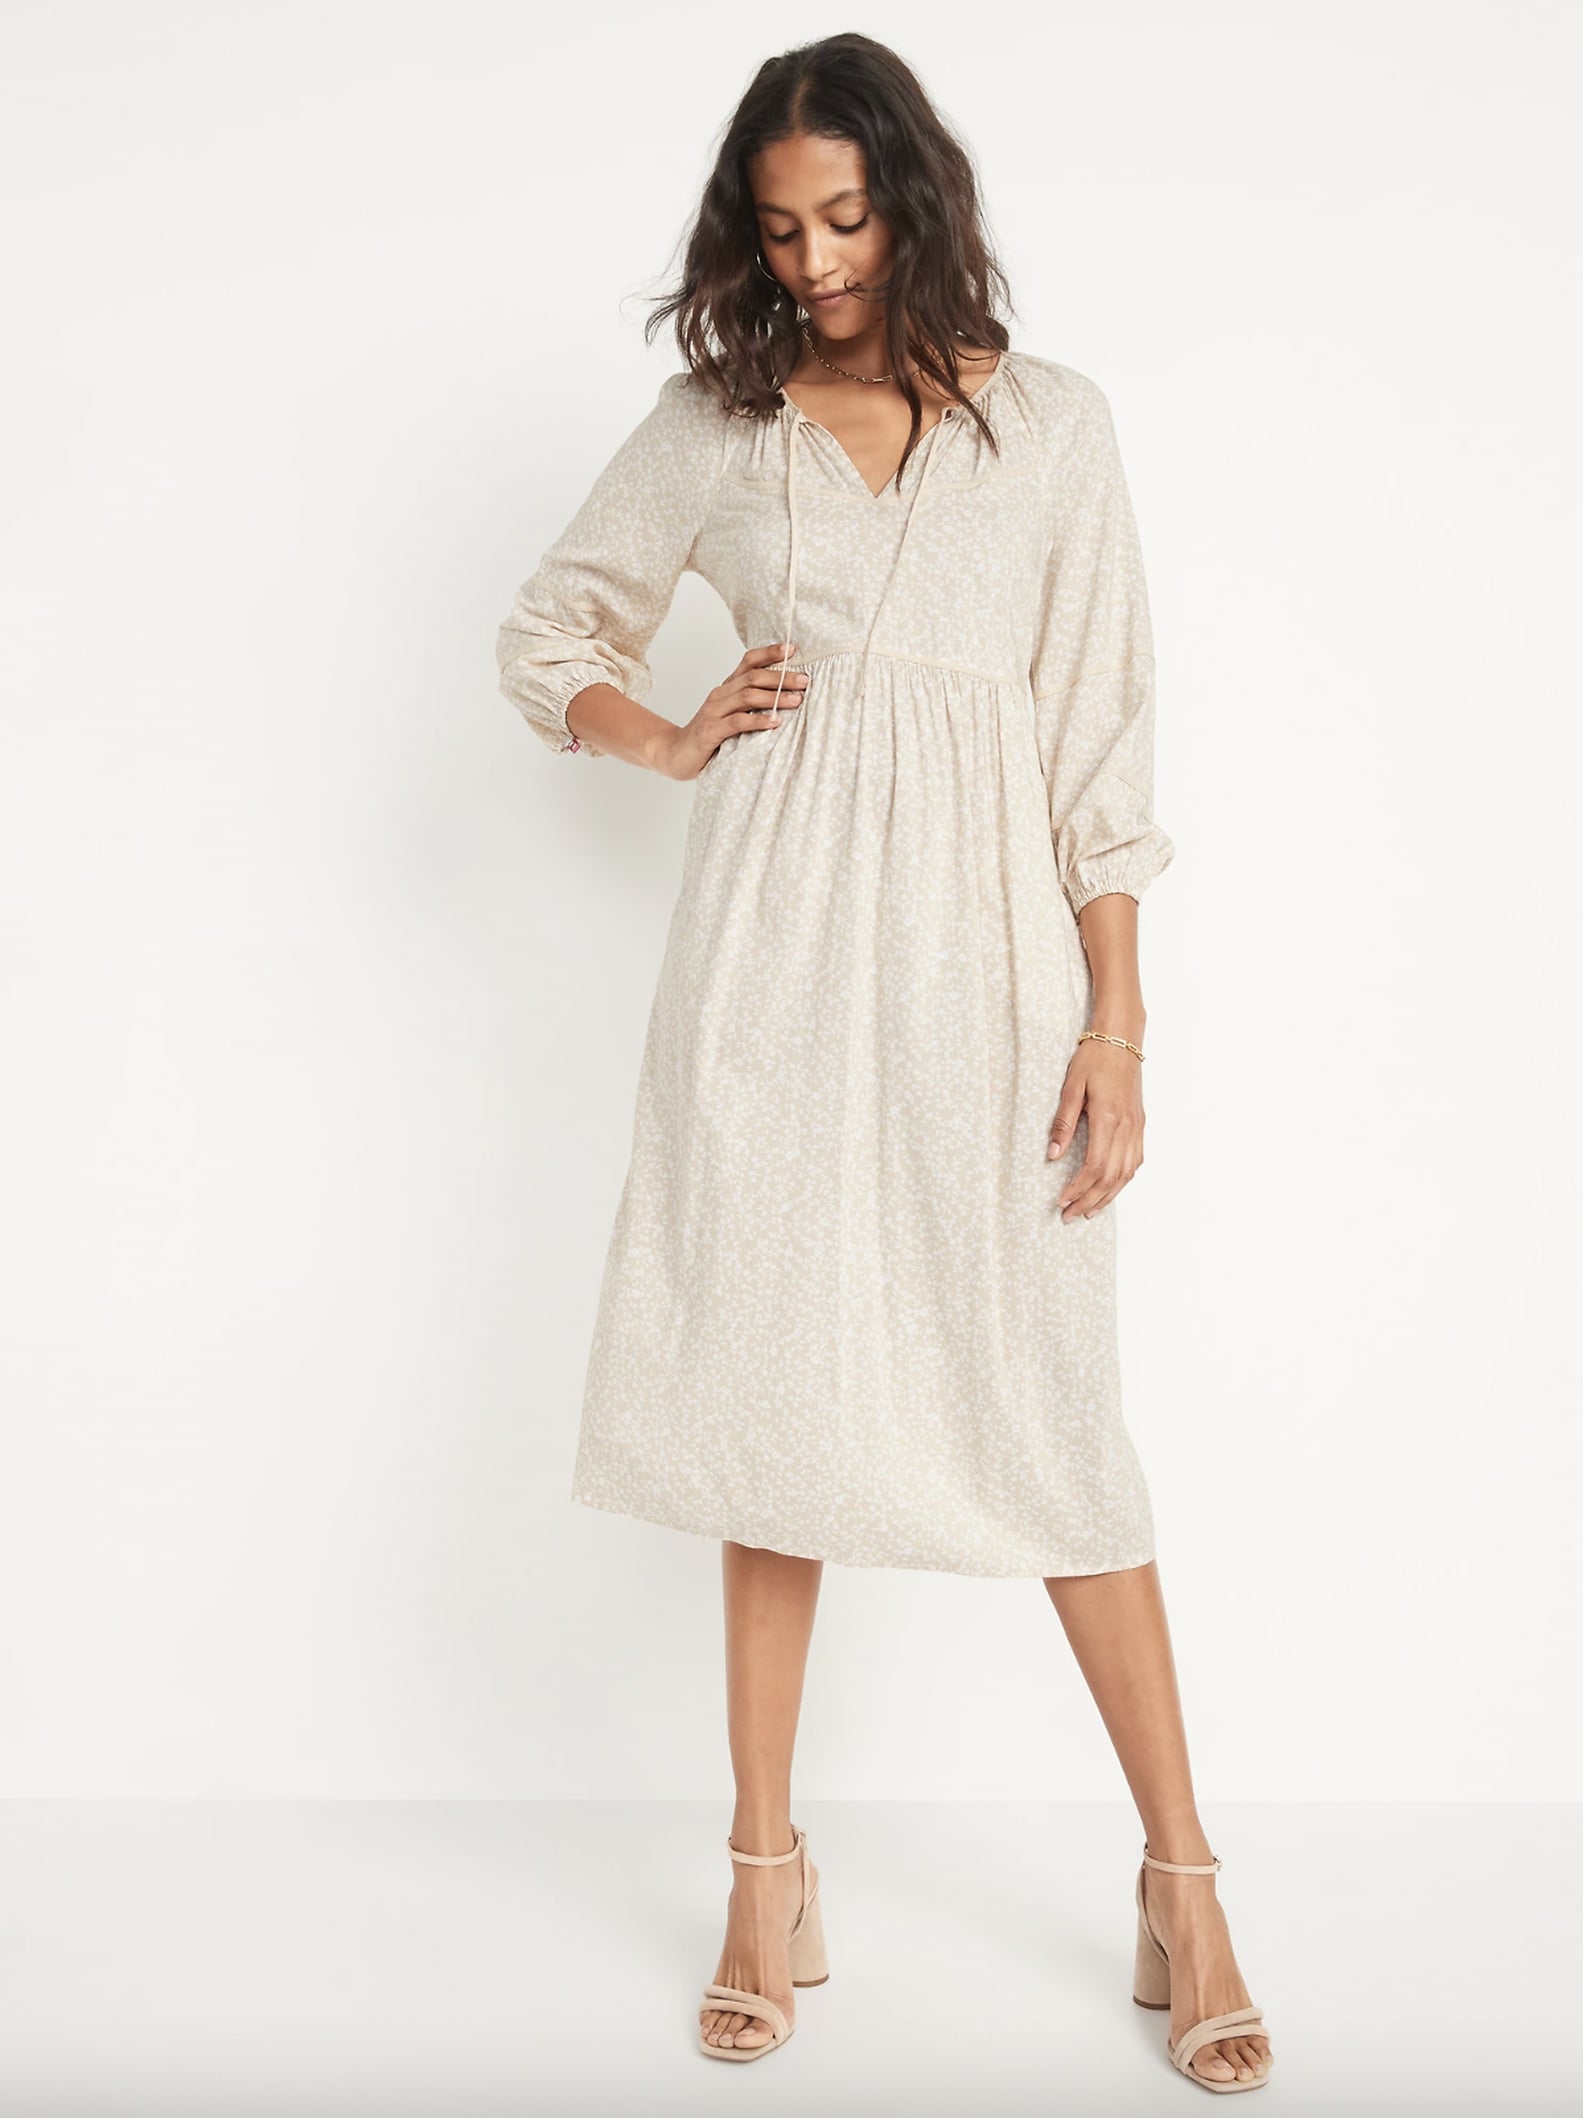 These Dresses From Old Navy Ooze Coastal-Grandma Chic | POPSUGAR Fashion